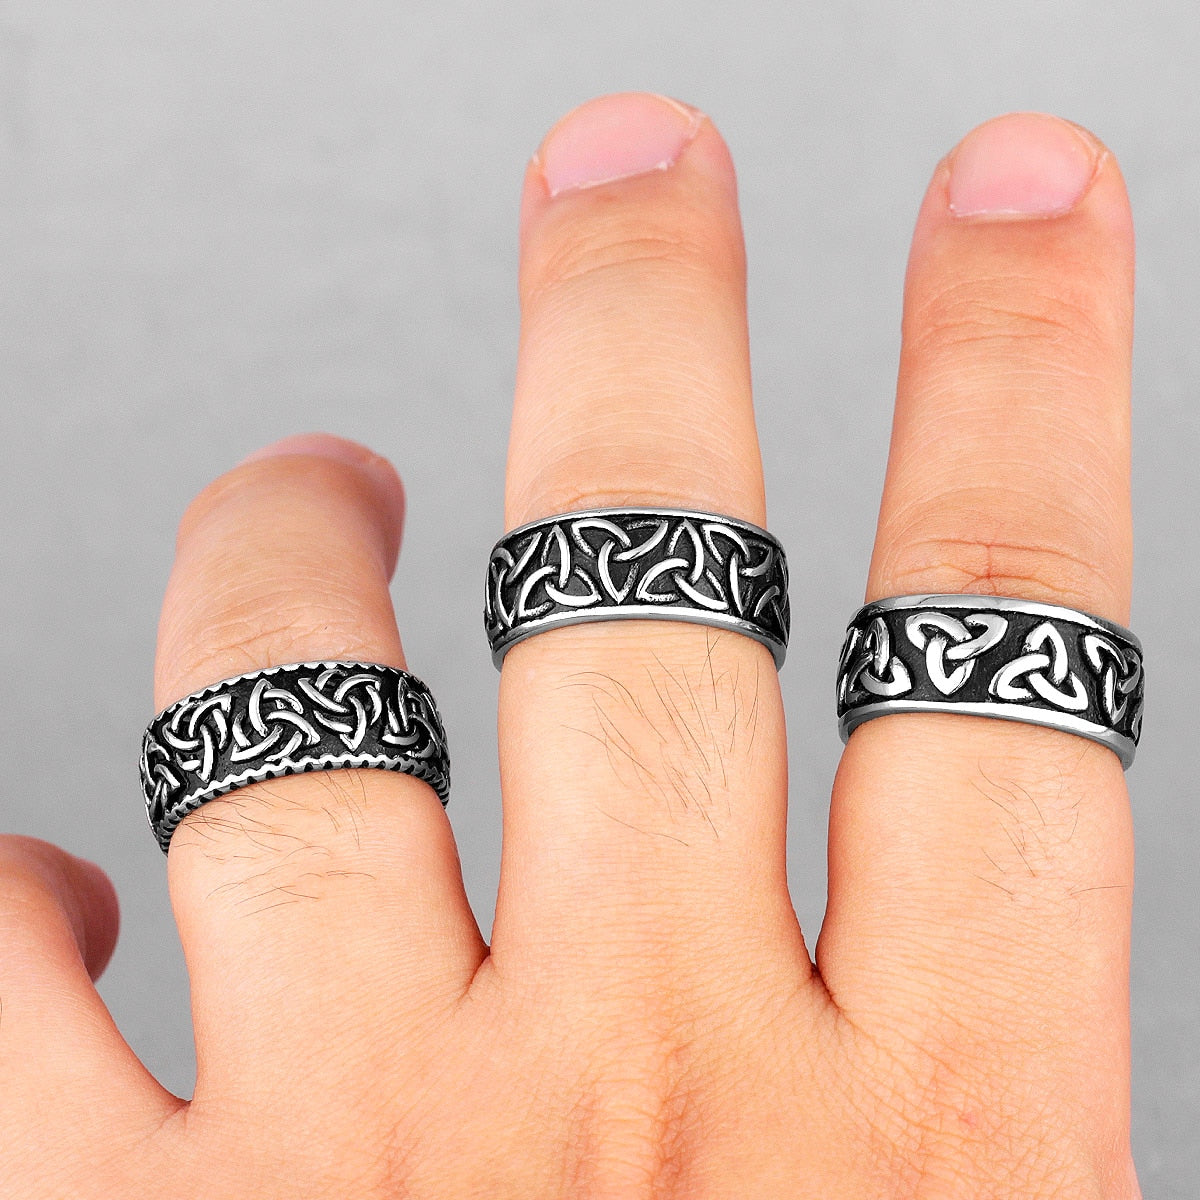 Celtic Knot Weave Viking Symbols Stainless Steel Mens Rings Punk Retro for Male Boyfriend Jewelry Creativity Gift Wholesale PAP SHOP 42